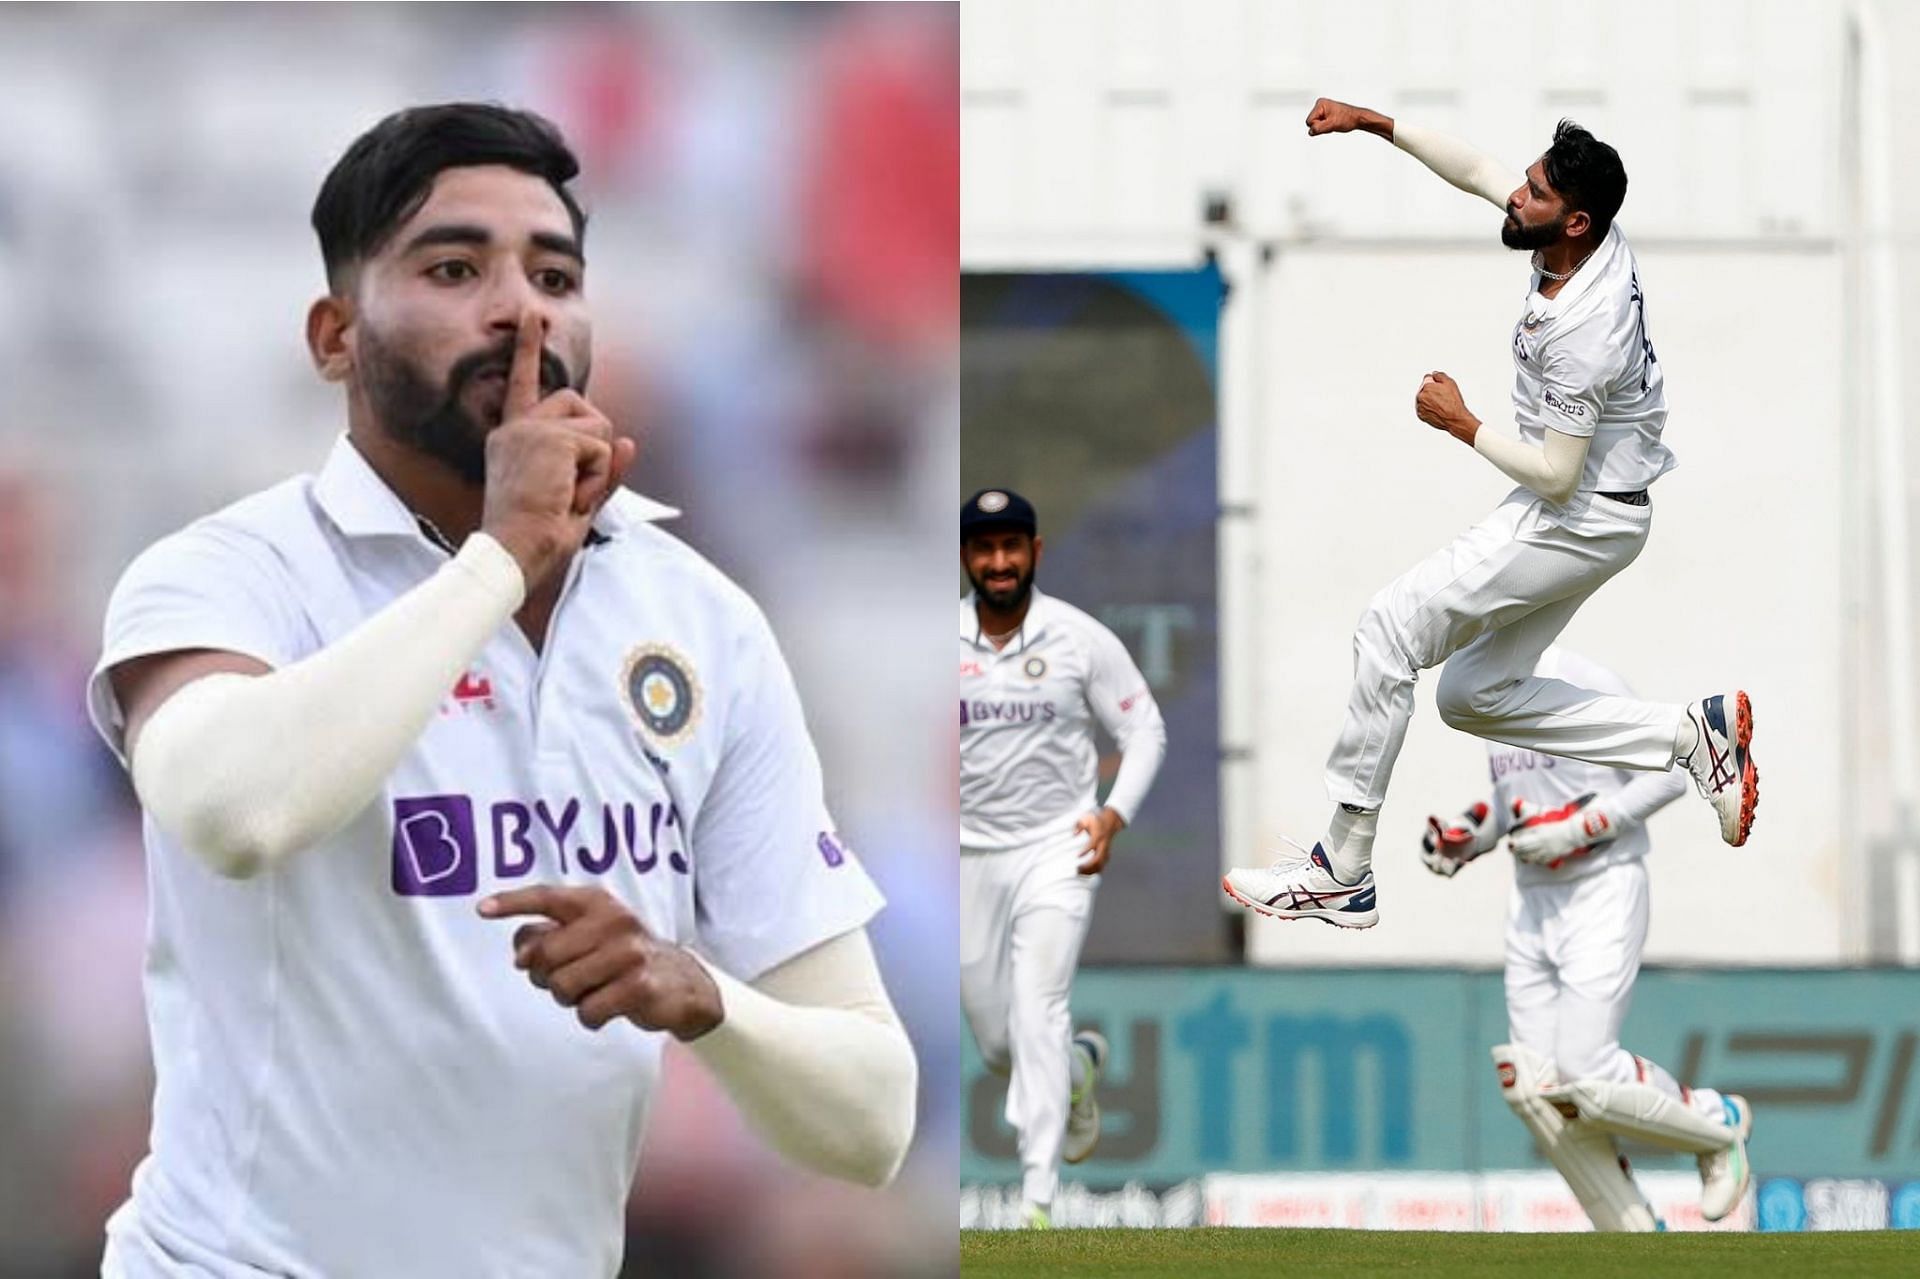 Mohammed Siraj was phenomenal in his opening spell against New Zealand in the second Test in Mumbai